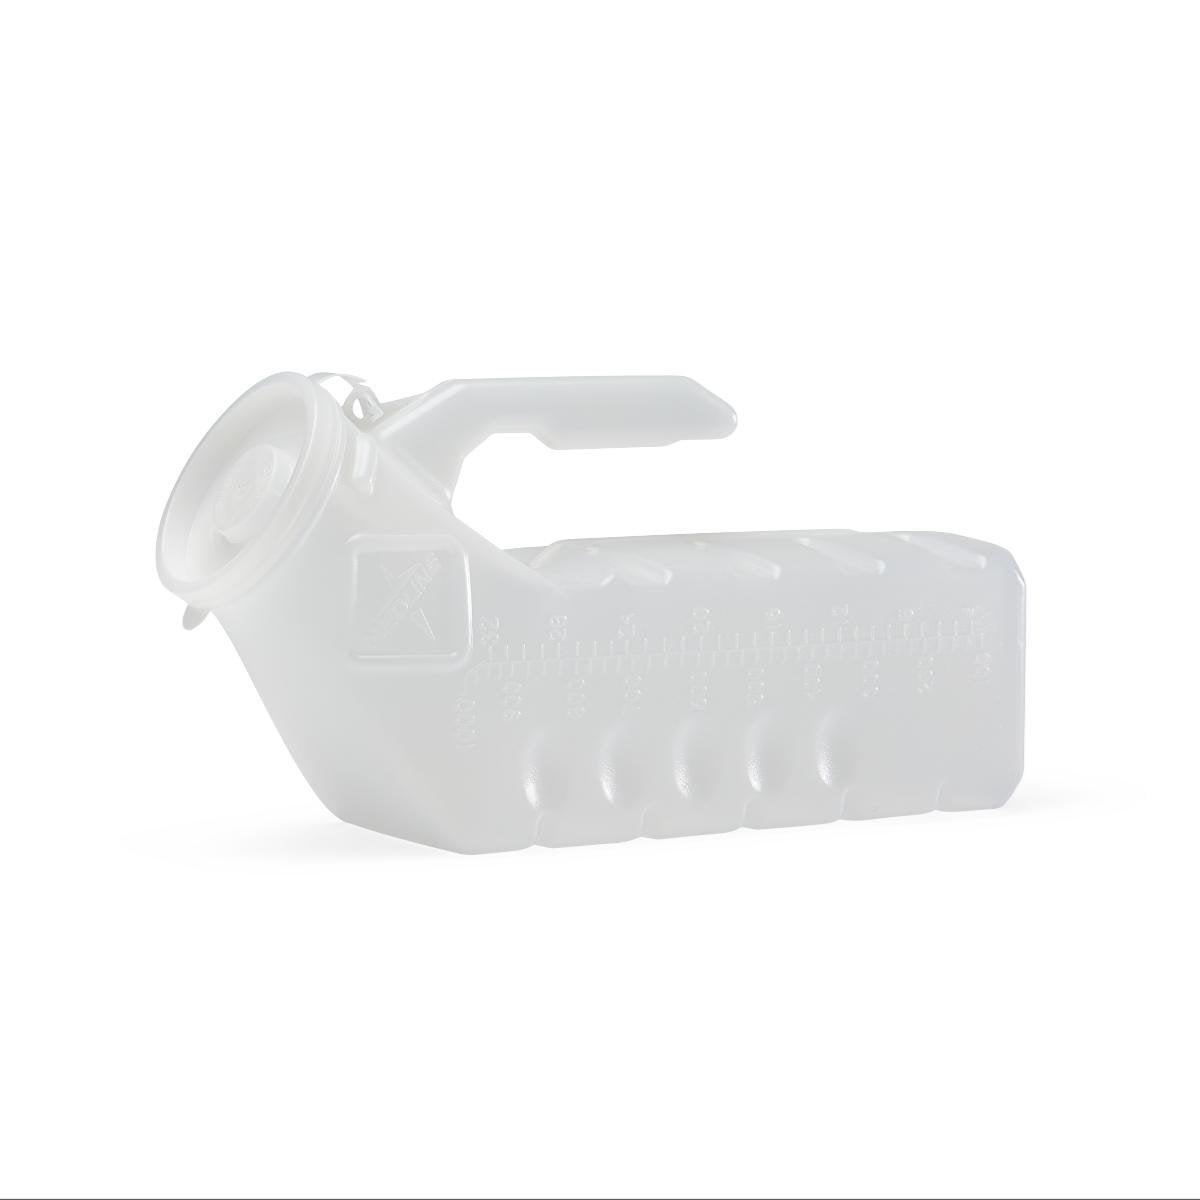 Translucent Male Urinal With Lid - 32oz/1000ml